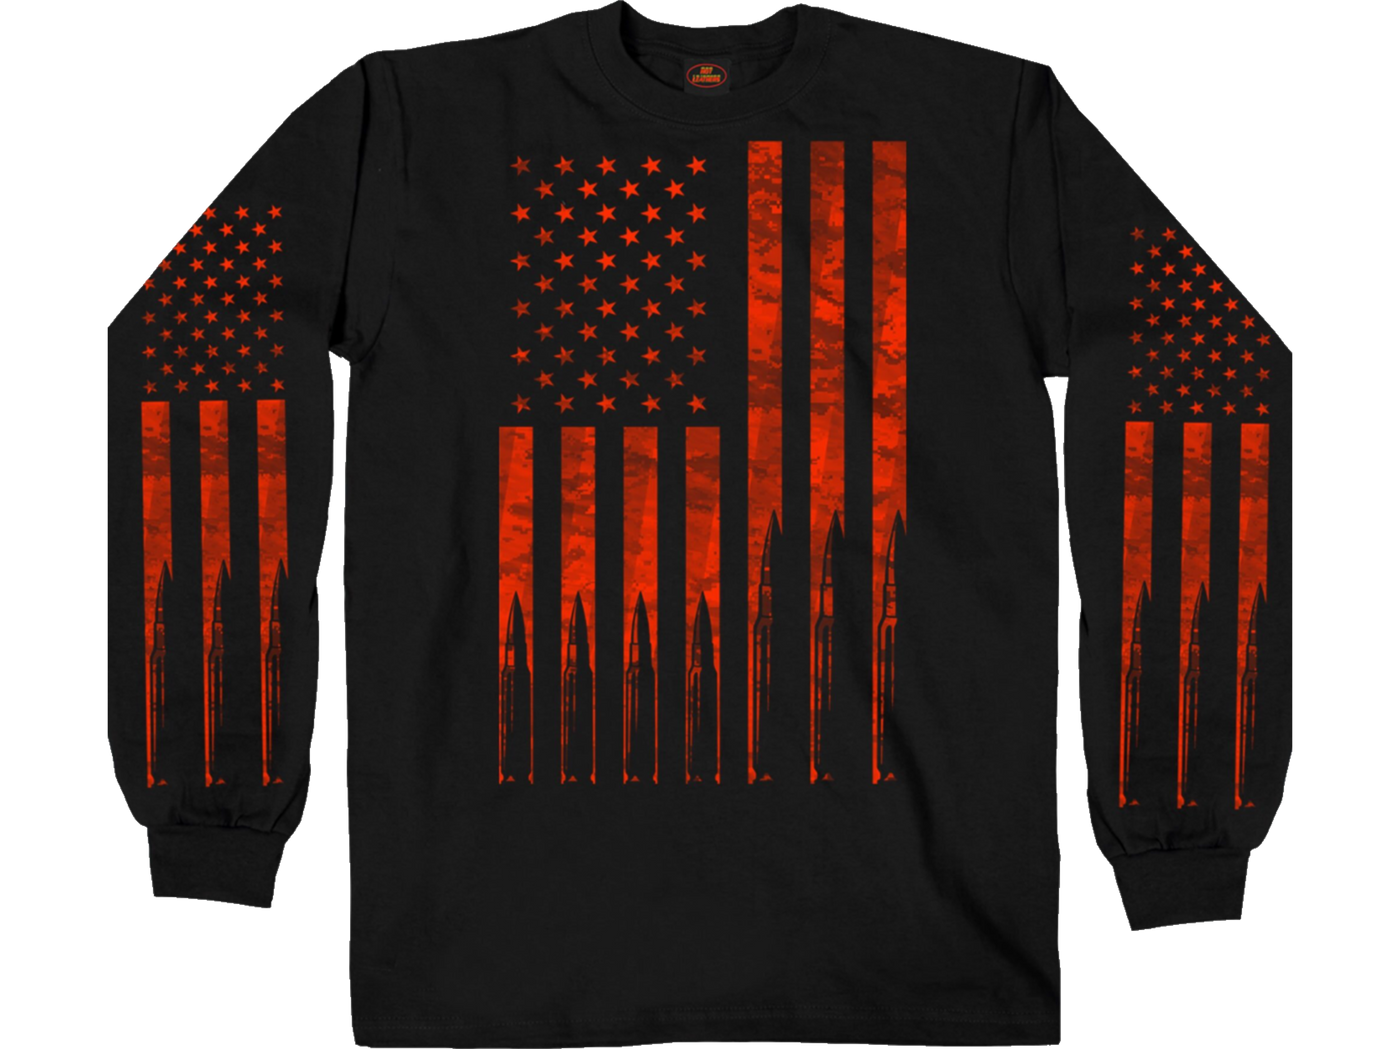 Be a part of the "Support Crew" and show your Flag! Cotton blend Long sleeves with back and sleeves graphics. This black long sleeved tee shirt has American flag pictured in red with bullet pictures creating tattered look to flag. Flags are pictured on front and both sleeves. Available in sizes Medium through 3x.